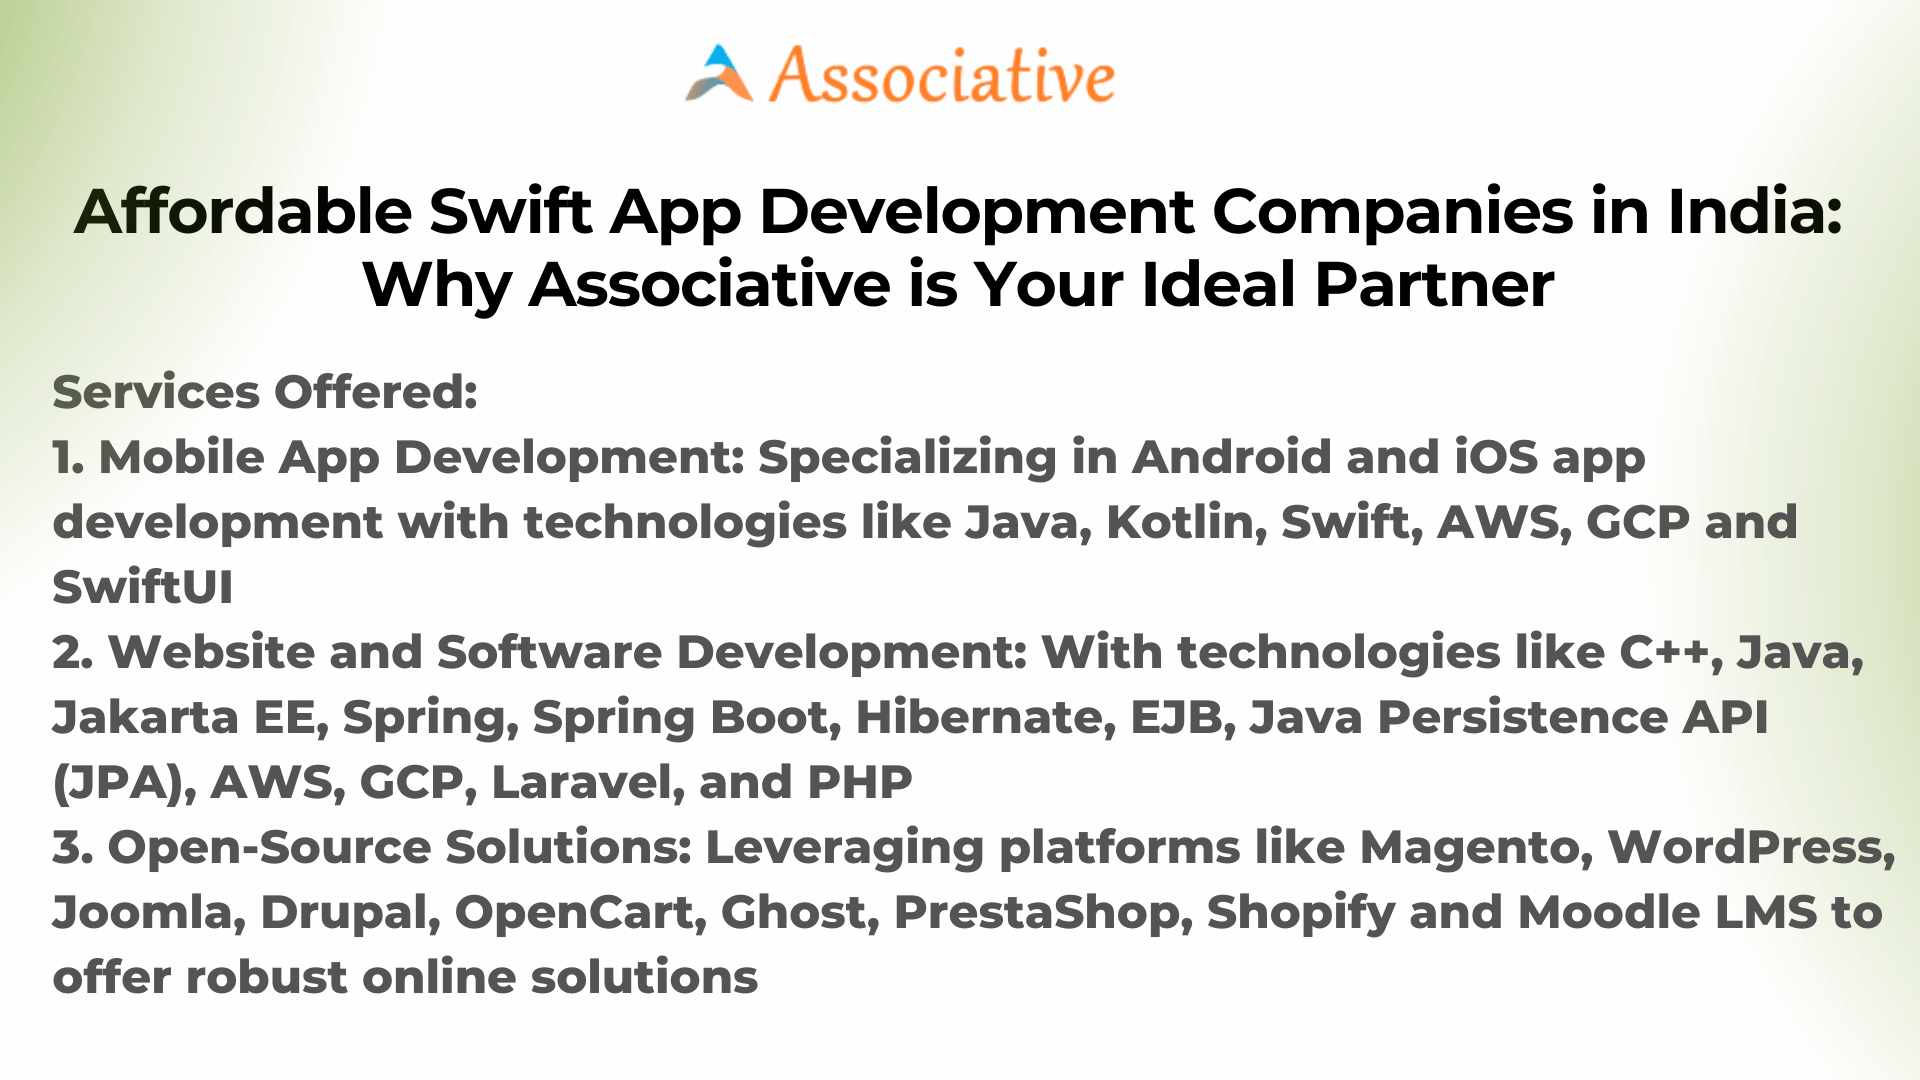 Affordable Swift App Development Companies in India Why Associative is Your Ideal Partner